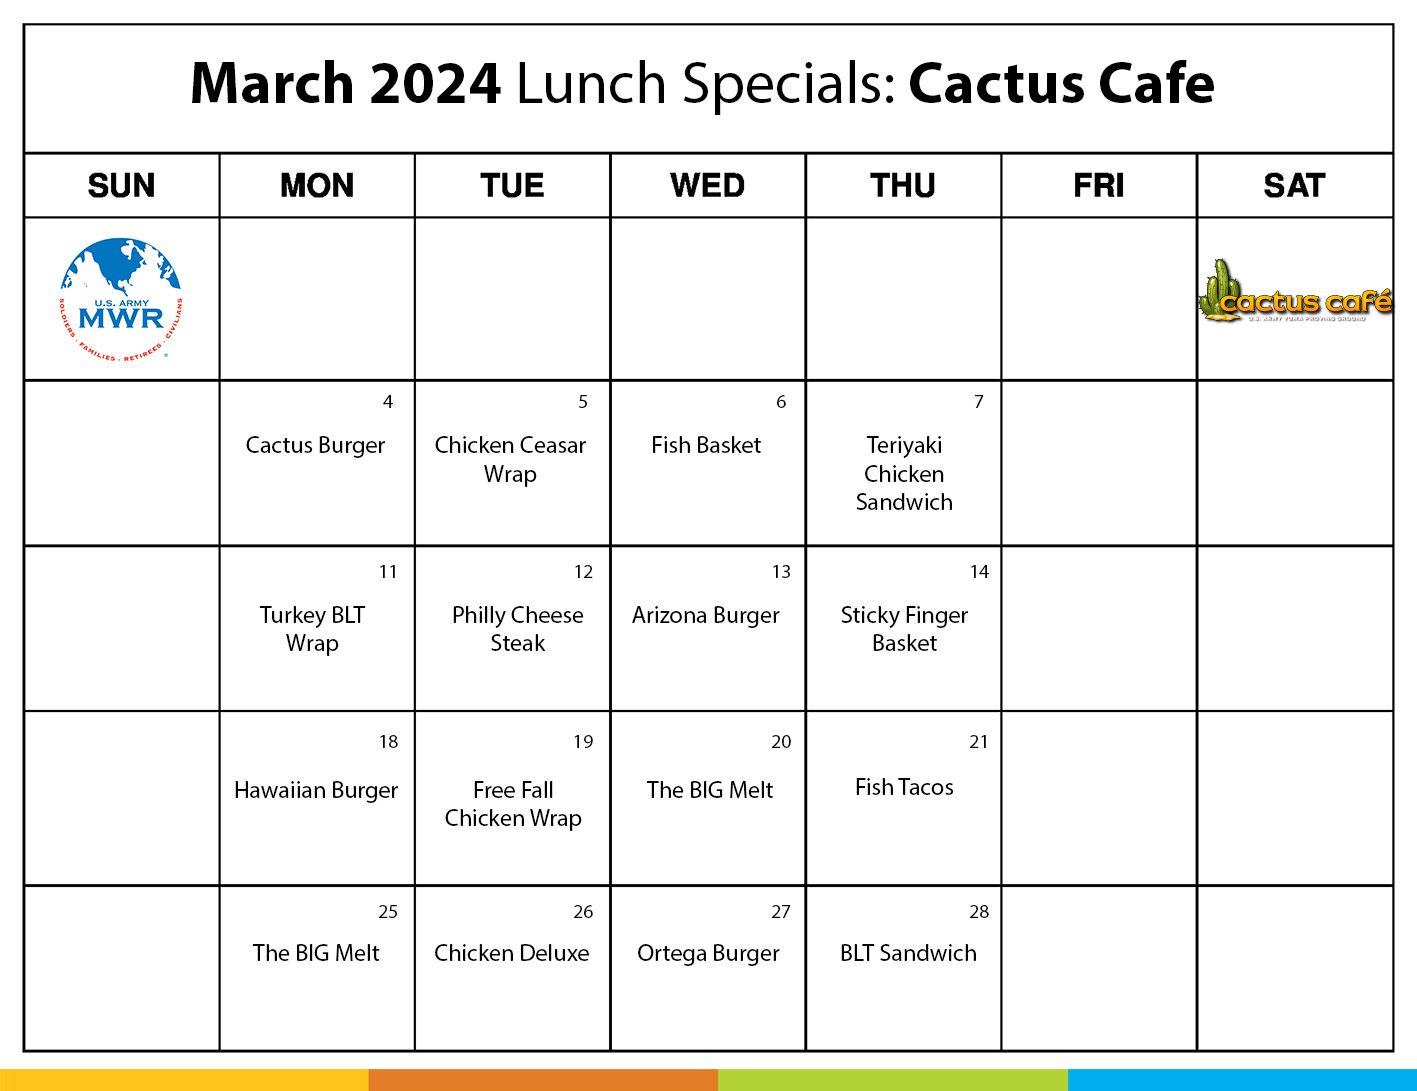 YPG_Cactus Cafe_March Lunch Special2024.jpg